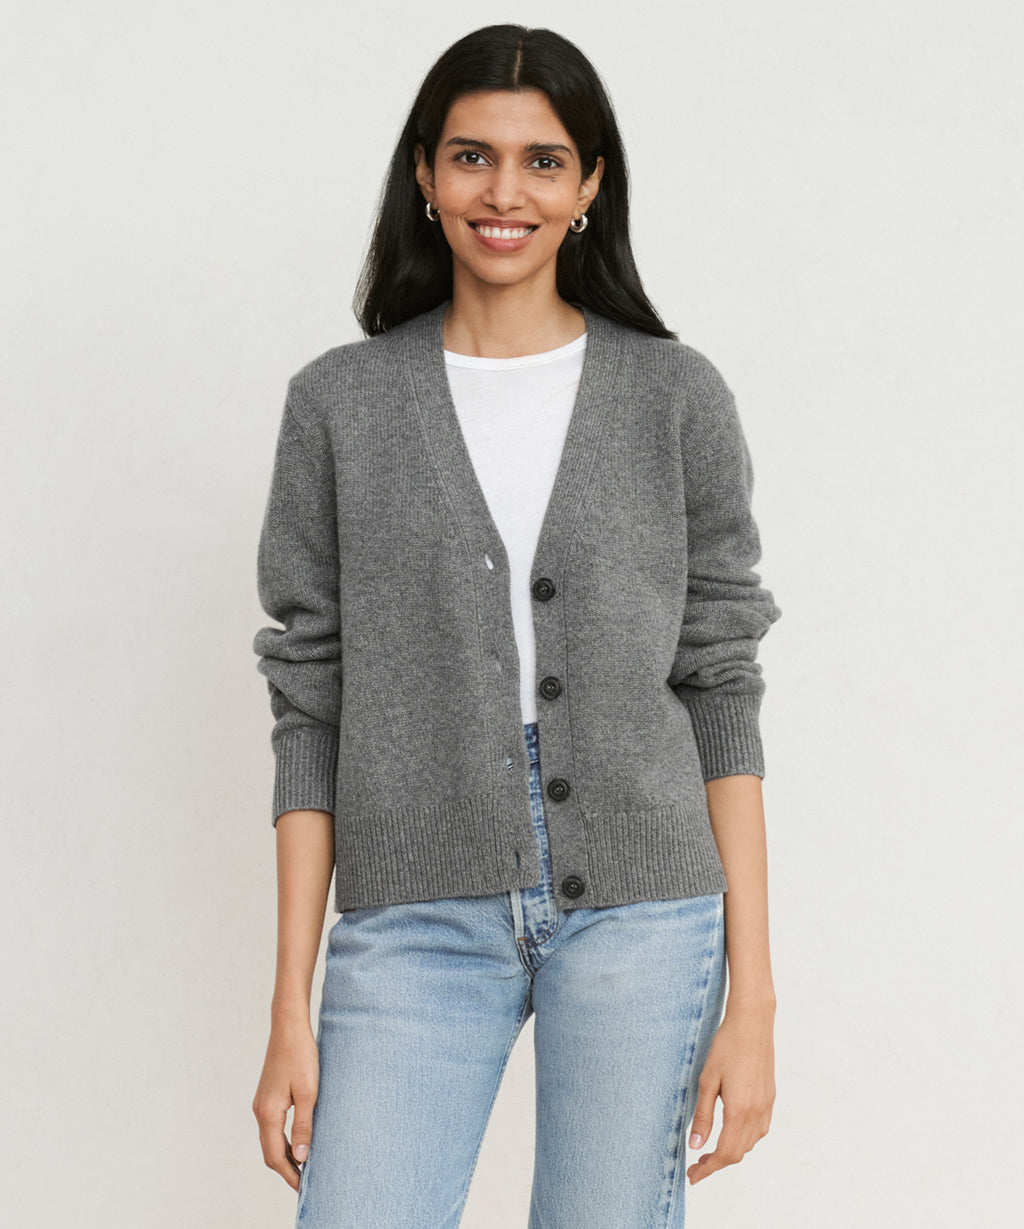 Quill Style Cardigan